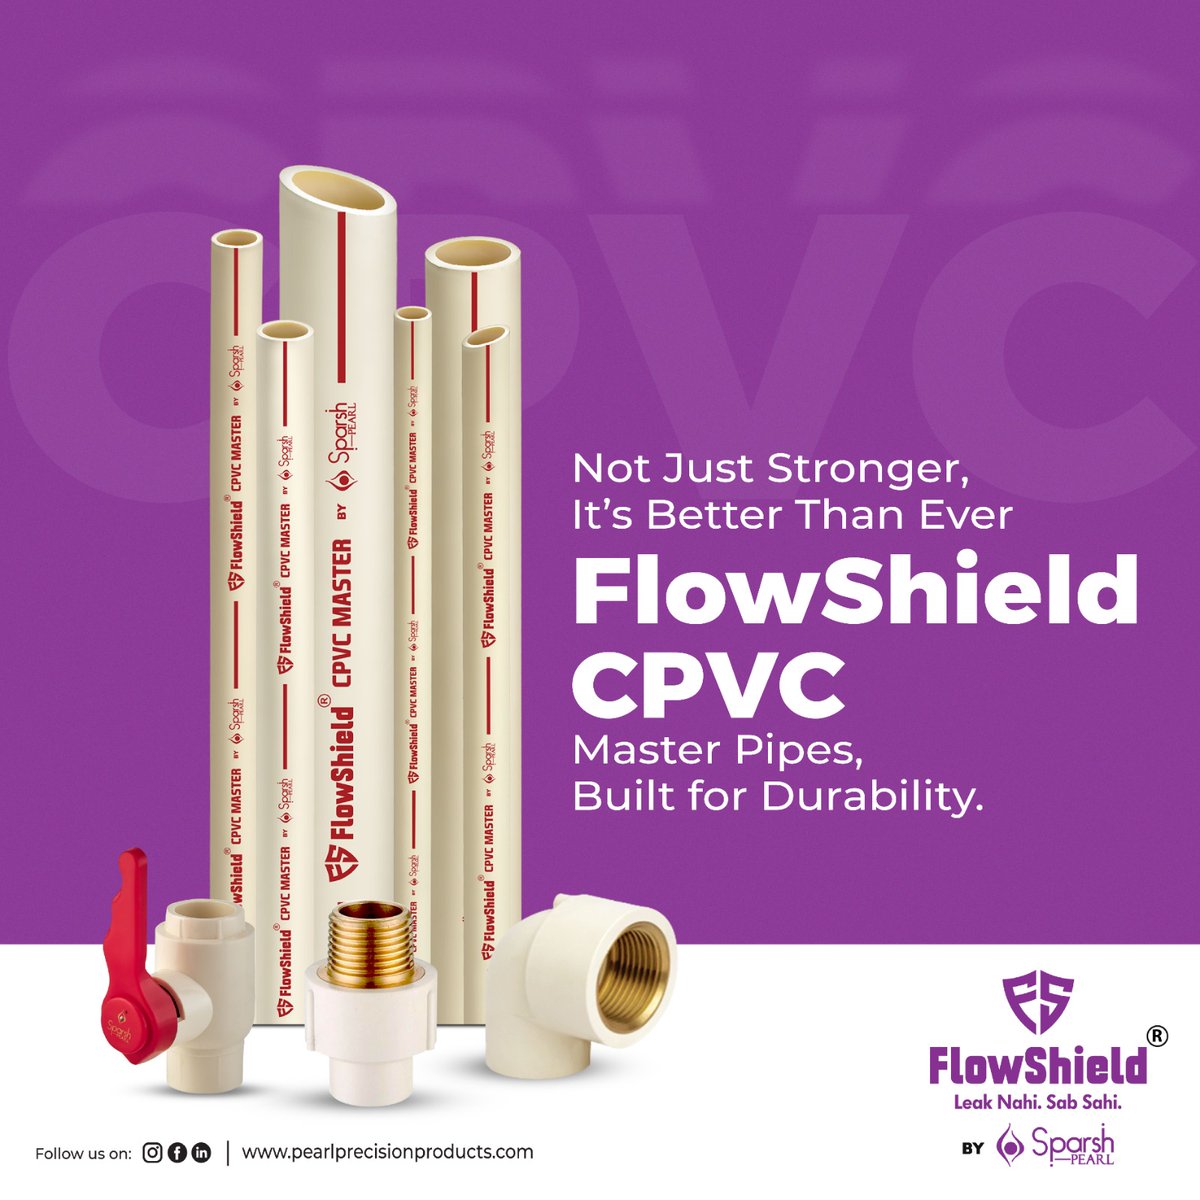 When durability is non-negotiable, turn to FlowShield CPVC Master Pipes. Built to last a lifetime trust. 

#FlowShieldDurability #MasterPipesReliability #BuiltToLast #PipingPerfection #FlowShieldQuality